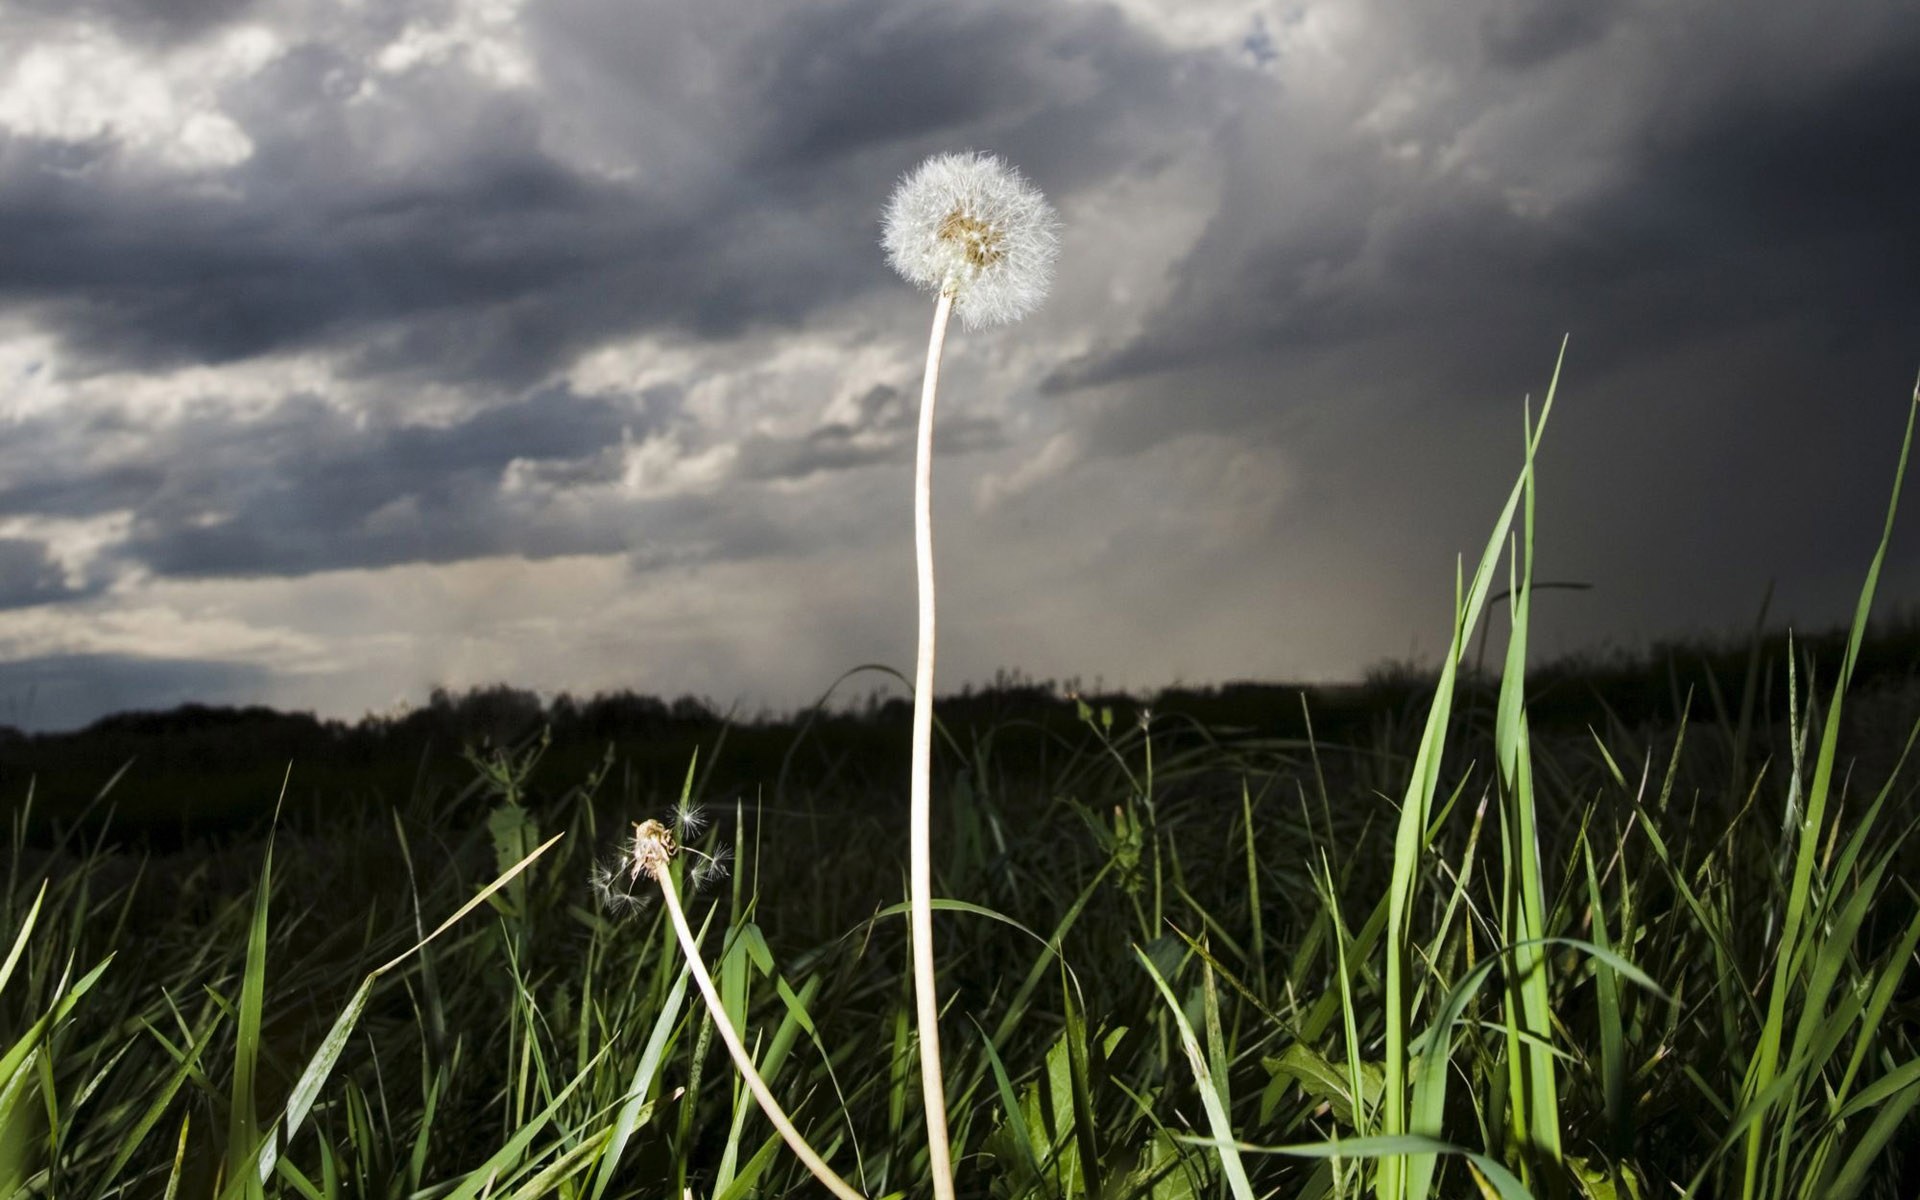 Dandelion under the stormy sky Wallpapers - HD Wallpapers 71913